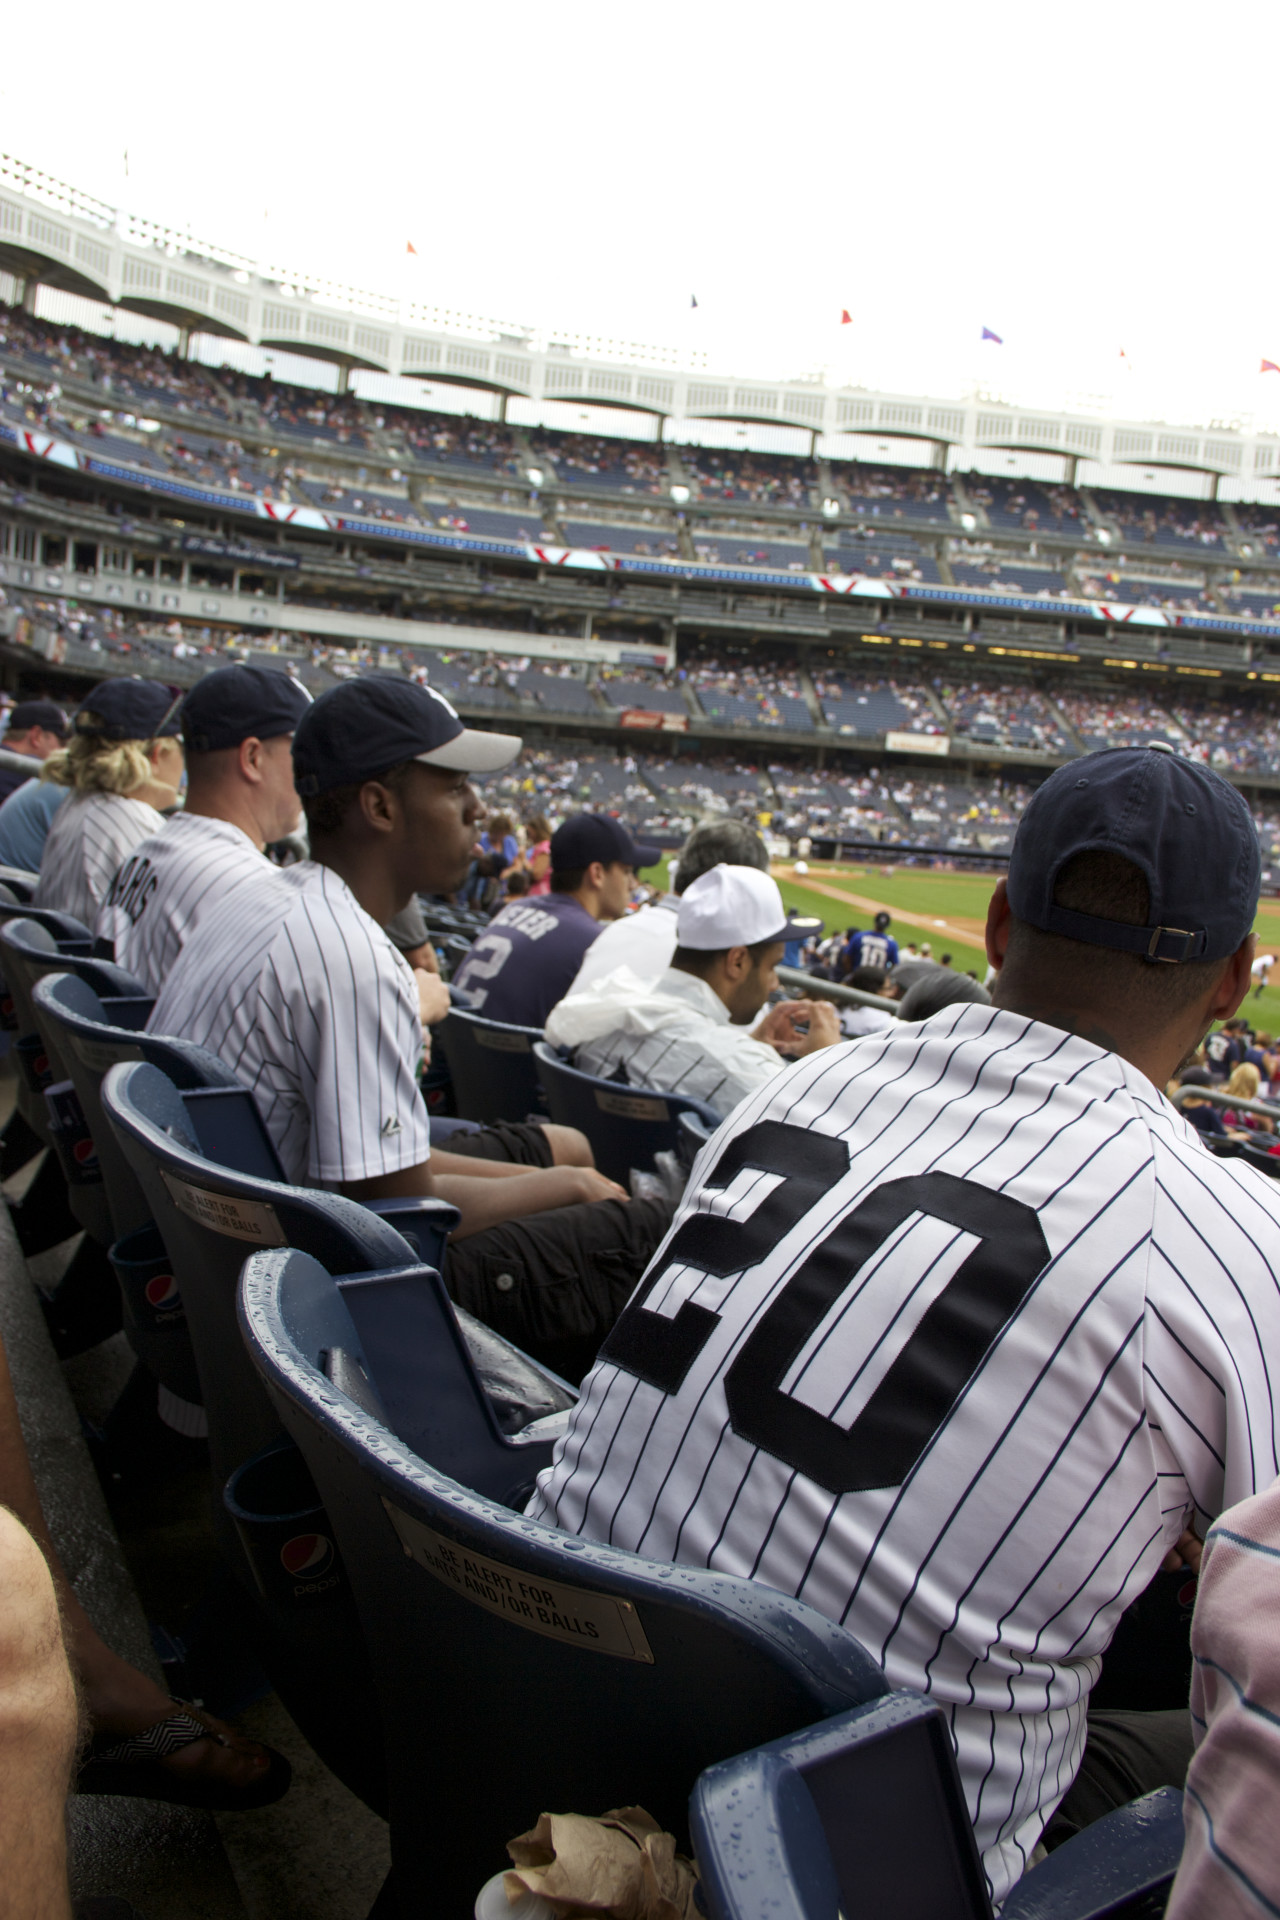 2013 Yankees Trip 5 - A Day With the Bronx Bombers - Take a Look Tuesday